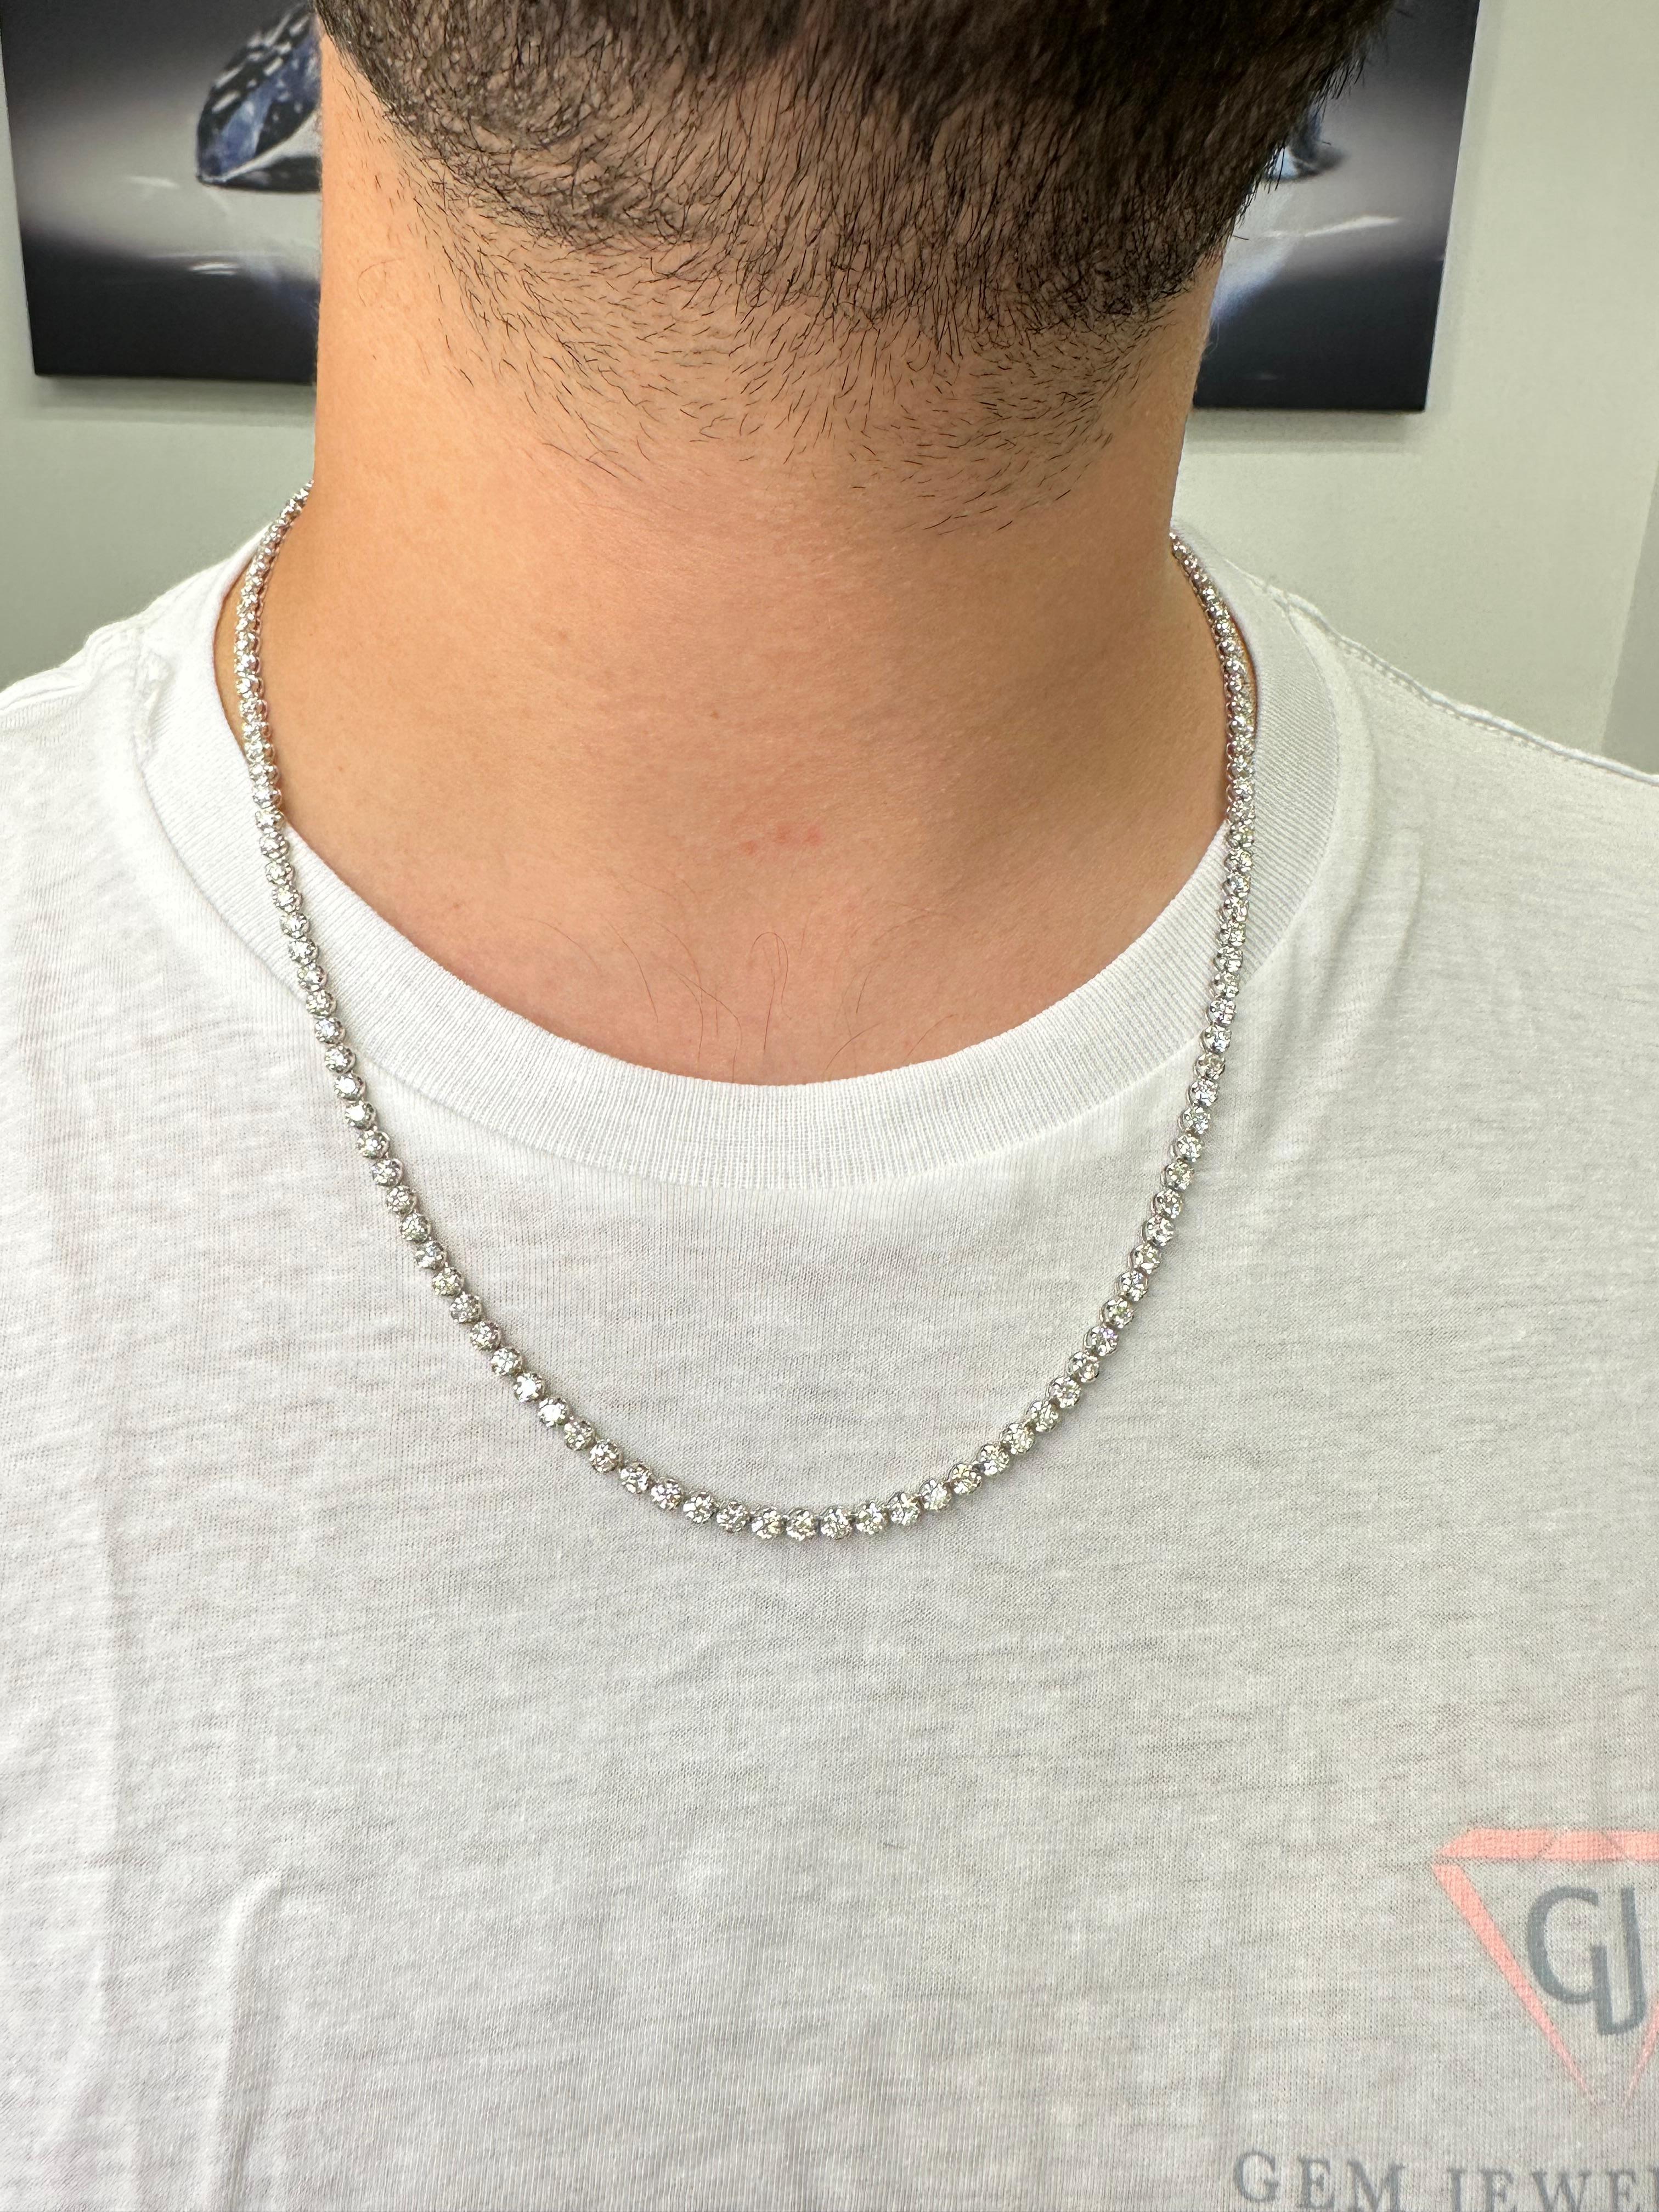 The 13 Carat Men's Diamond Tennis Necklace Chain is a true statement piece. This tennis necklace is crafted from 14K White Gold, which provides a classic and elegant look. At the heart of this tennis necklace are the 13 carats of Diamonds set in a